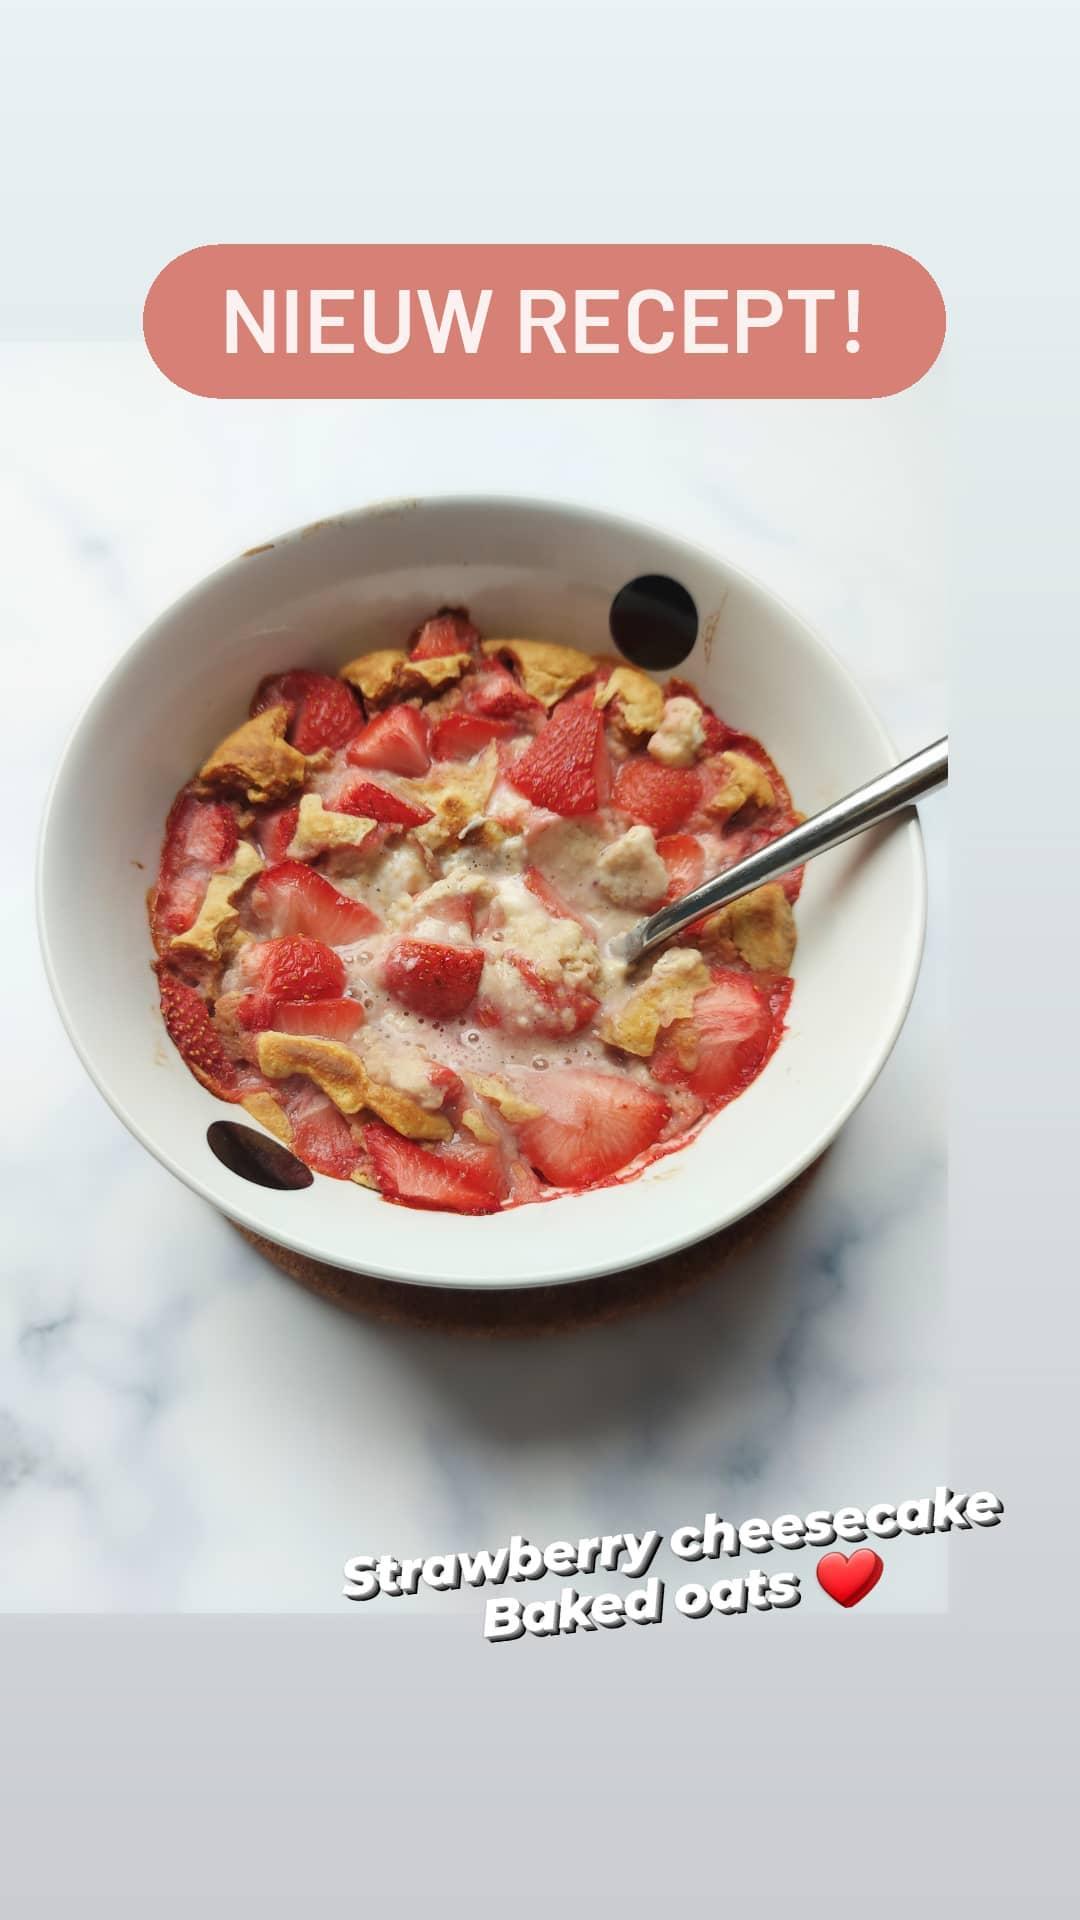 Strawberry cheesecake baked oats